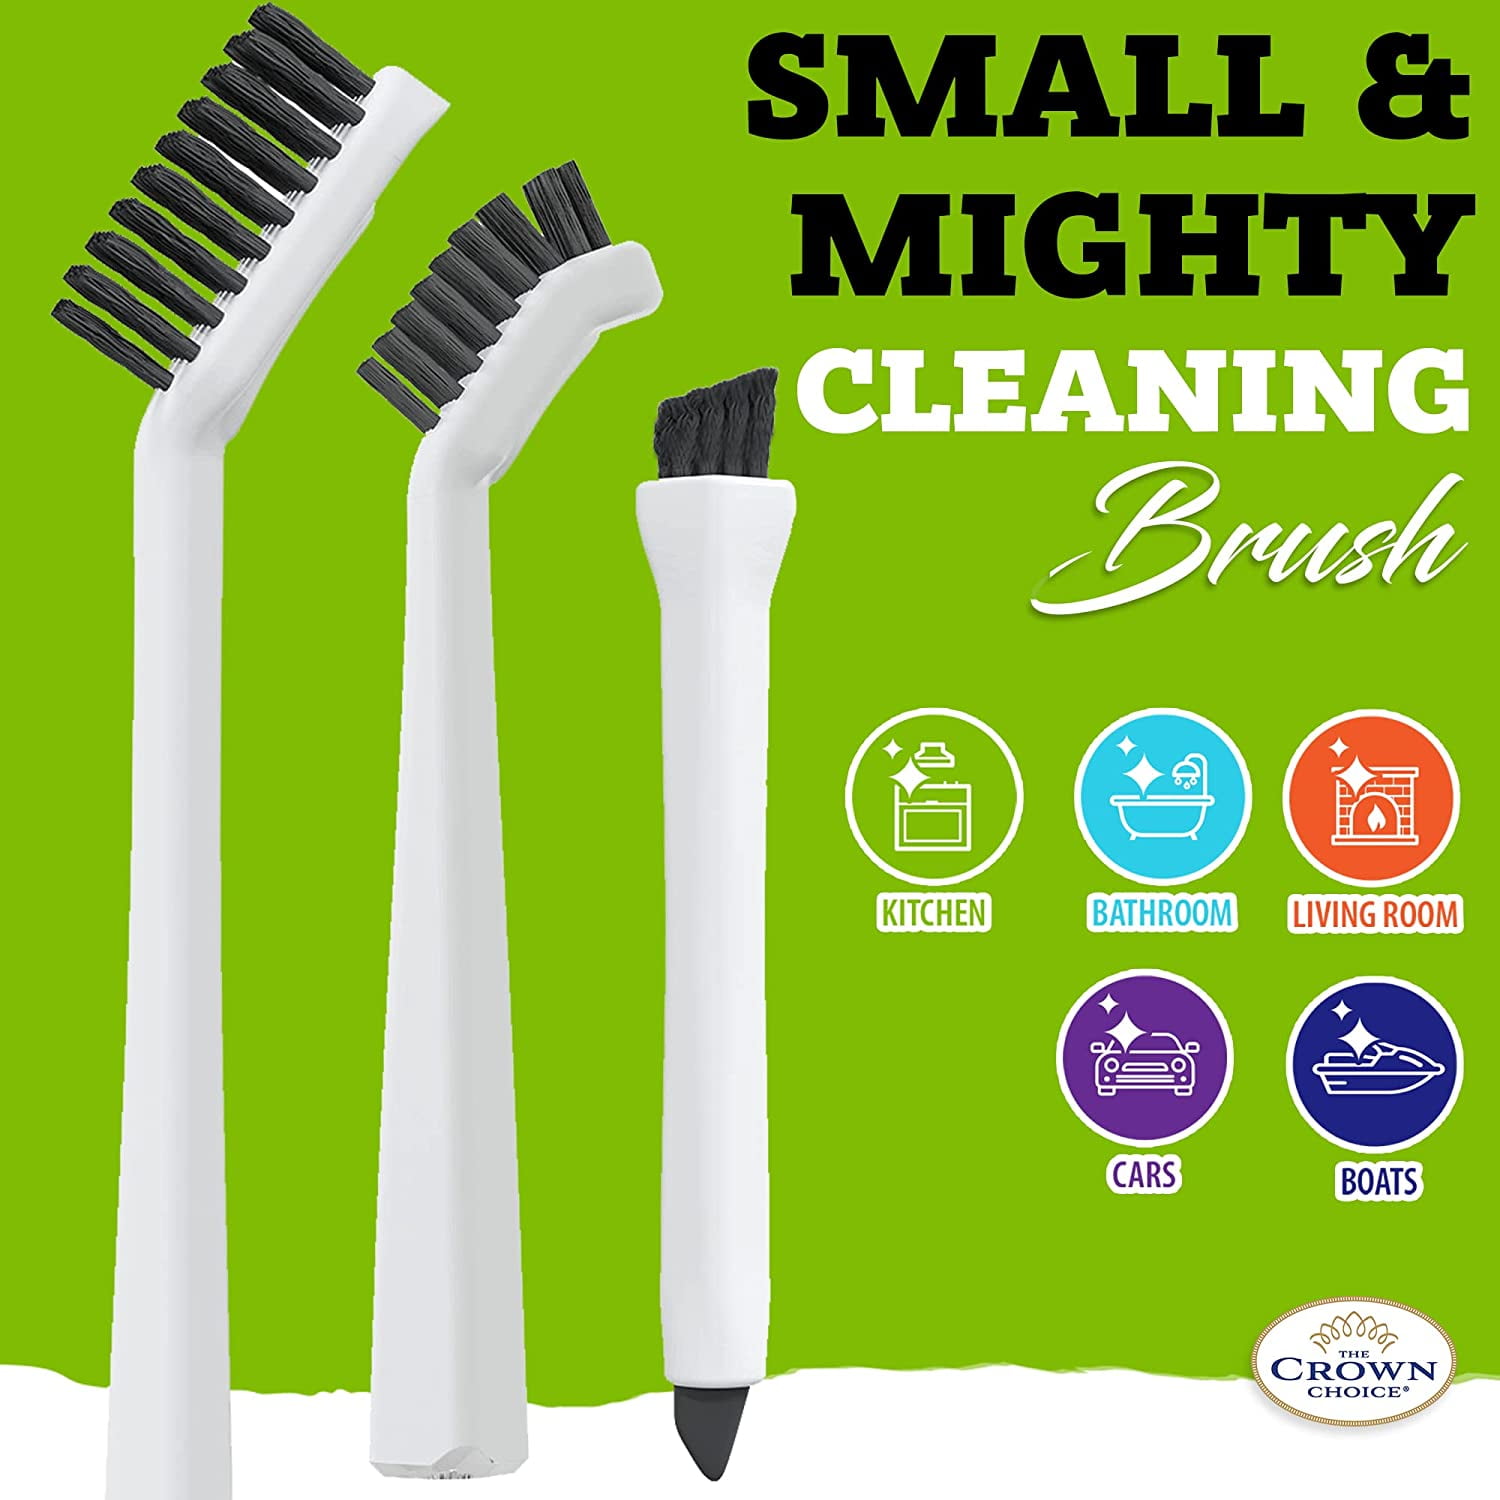 Living&Giving Grout Brush, (3 in 1) Grout Cleaner Brush, of - 3 Count (Pack of 1)